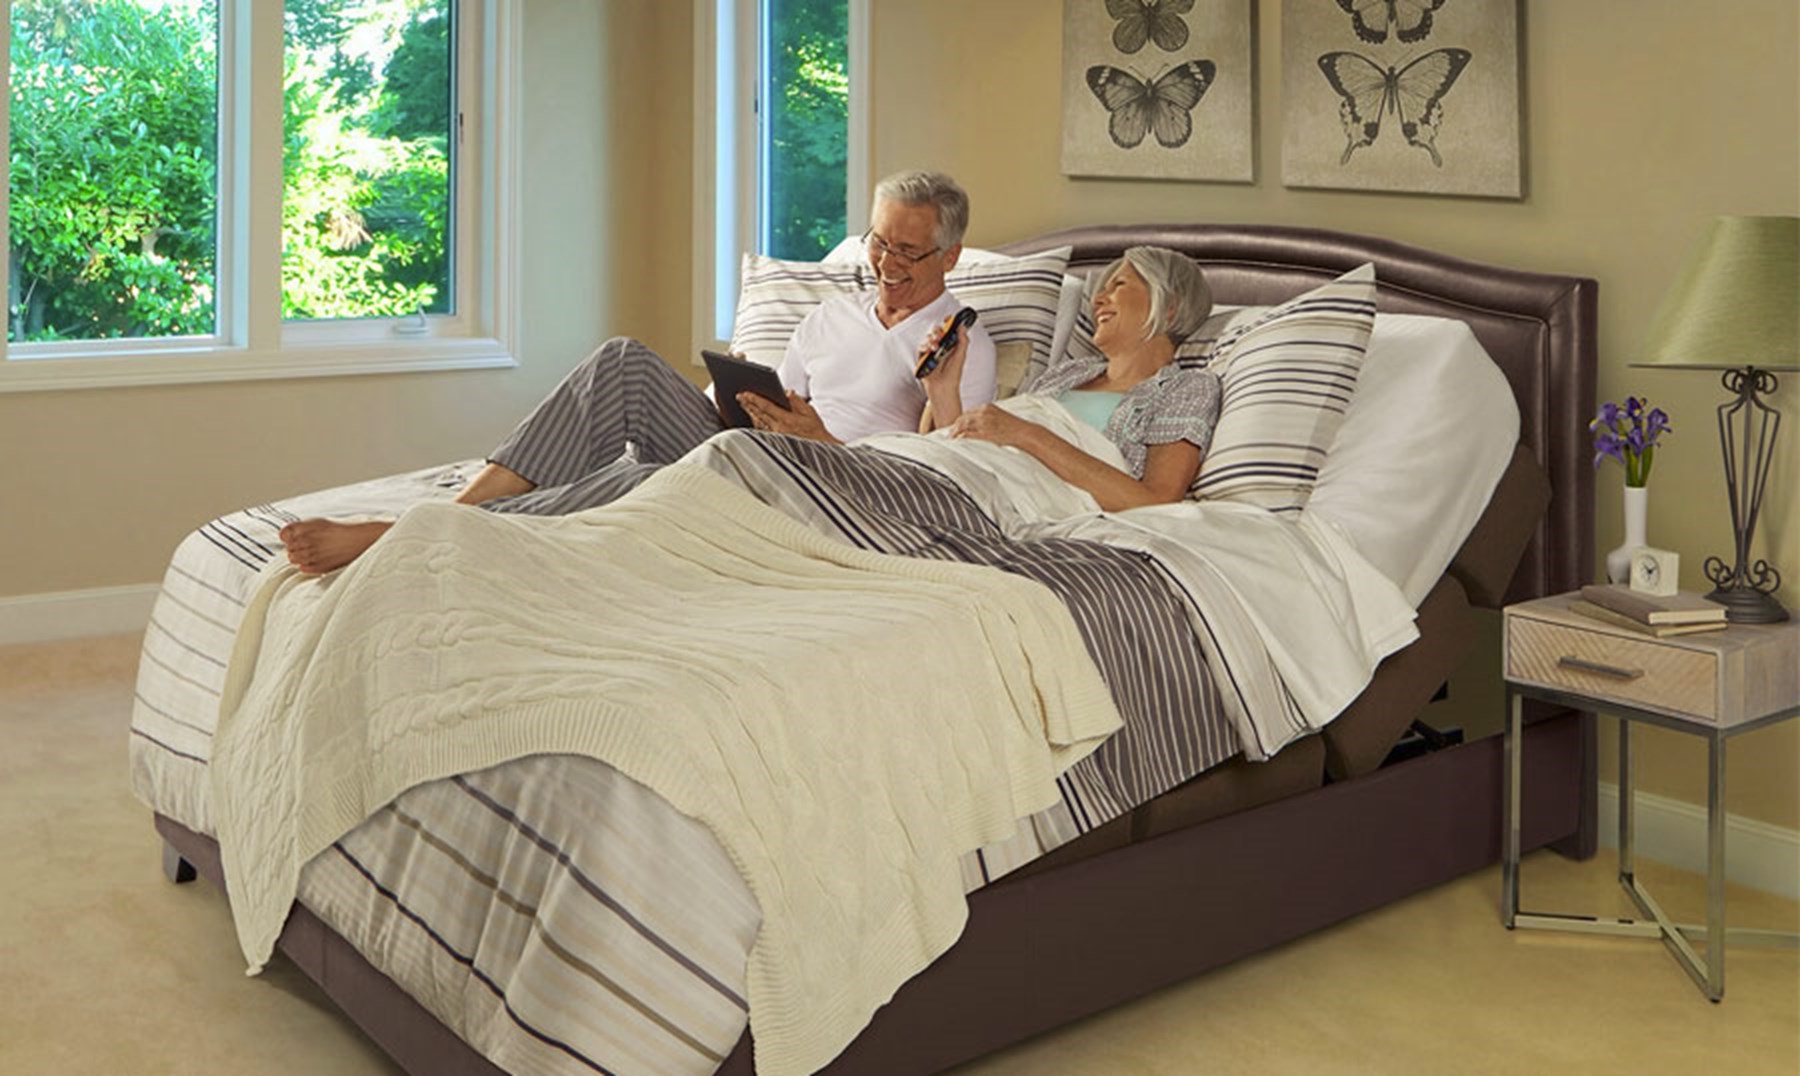 Mattress Store Adjustable Beds Financing Delivery